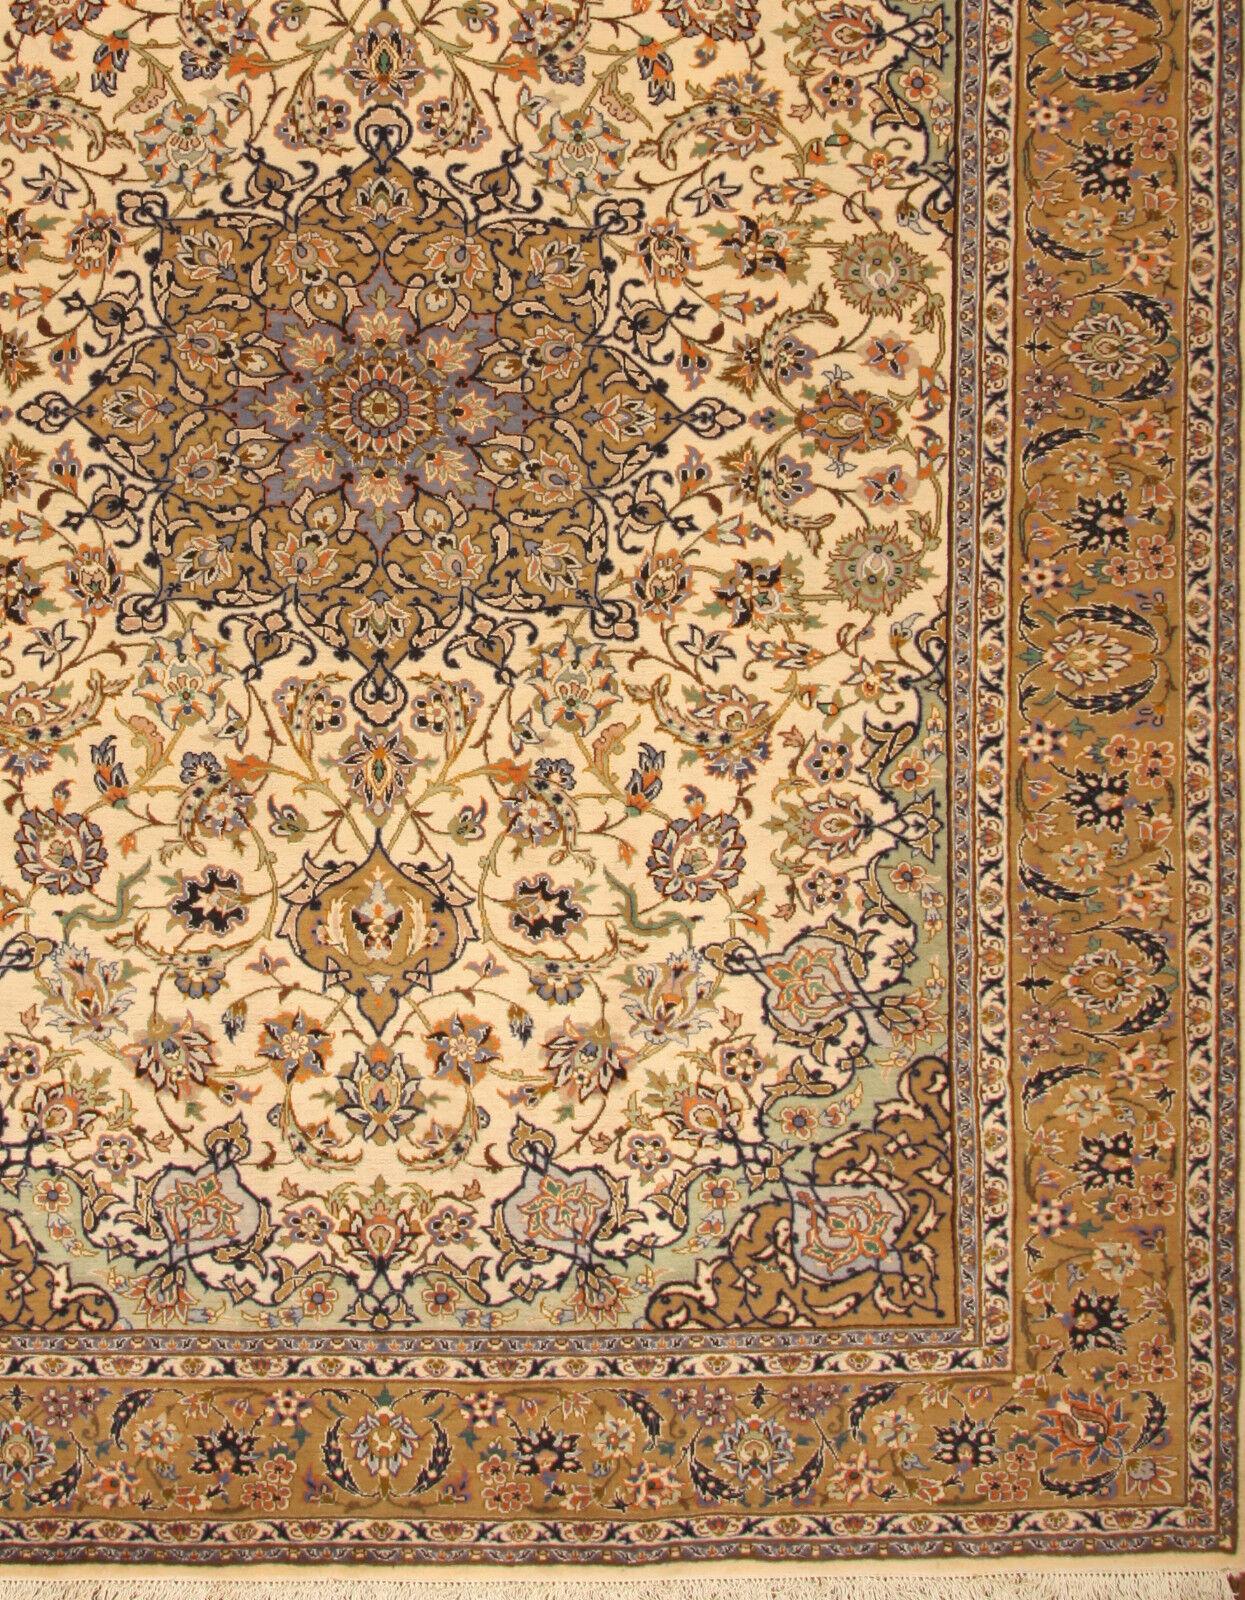 Wool Handmade Contemporary Isfahan Rug 9.6' x 12.7' (295cm x 390cm), 2000s - 1T02 For Sale